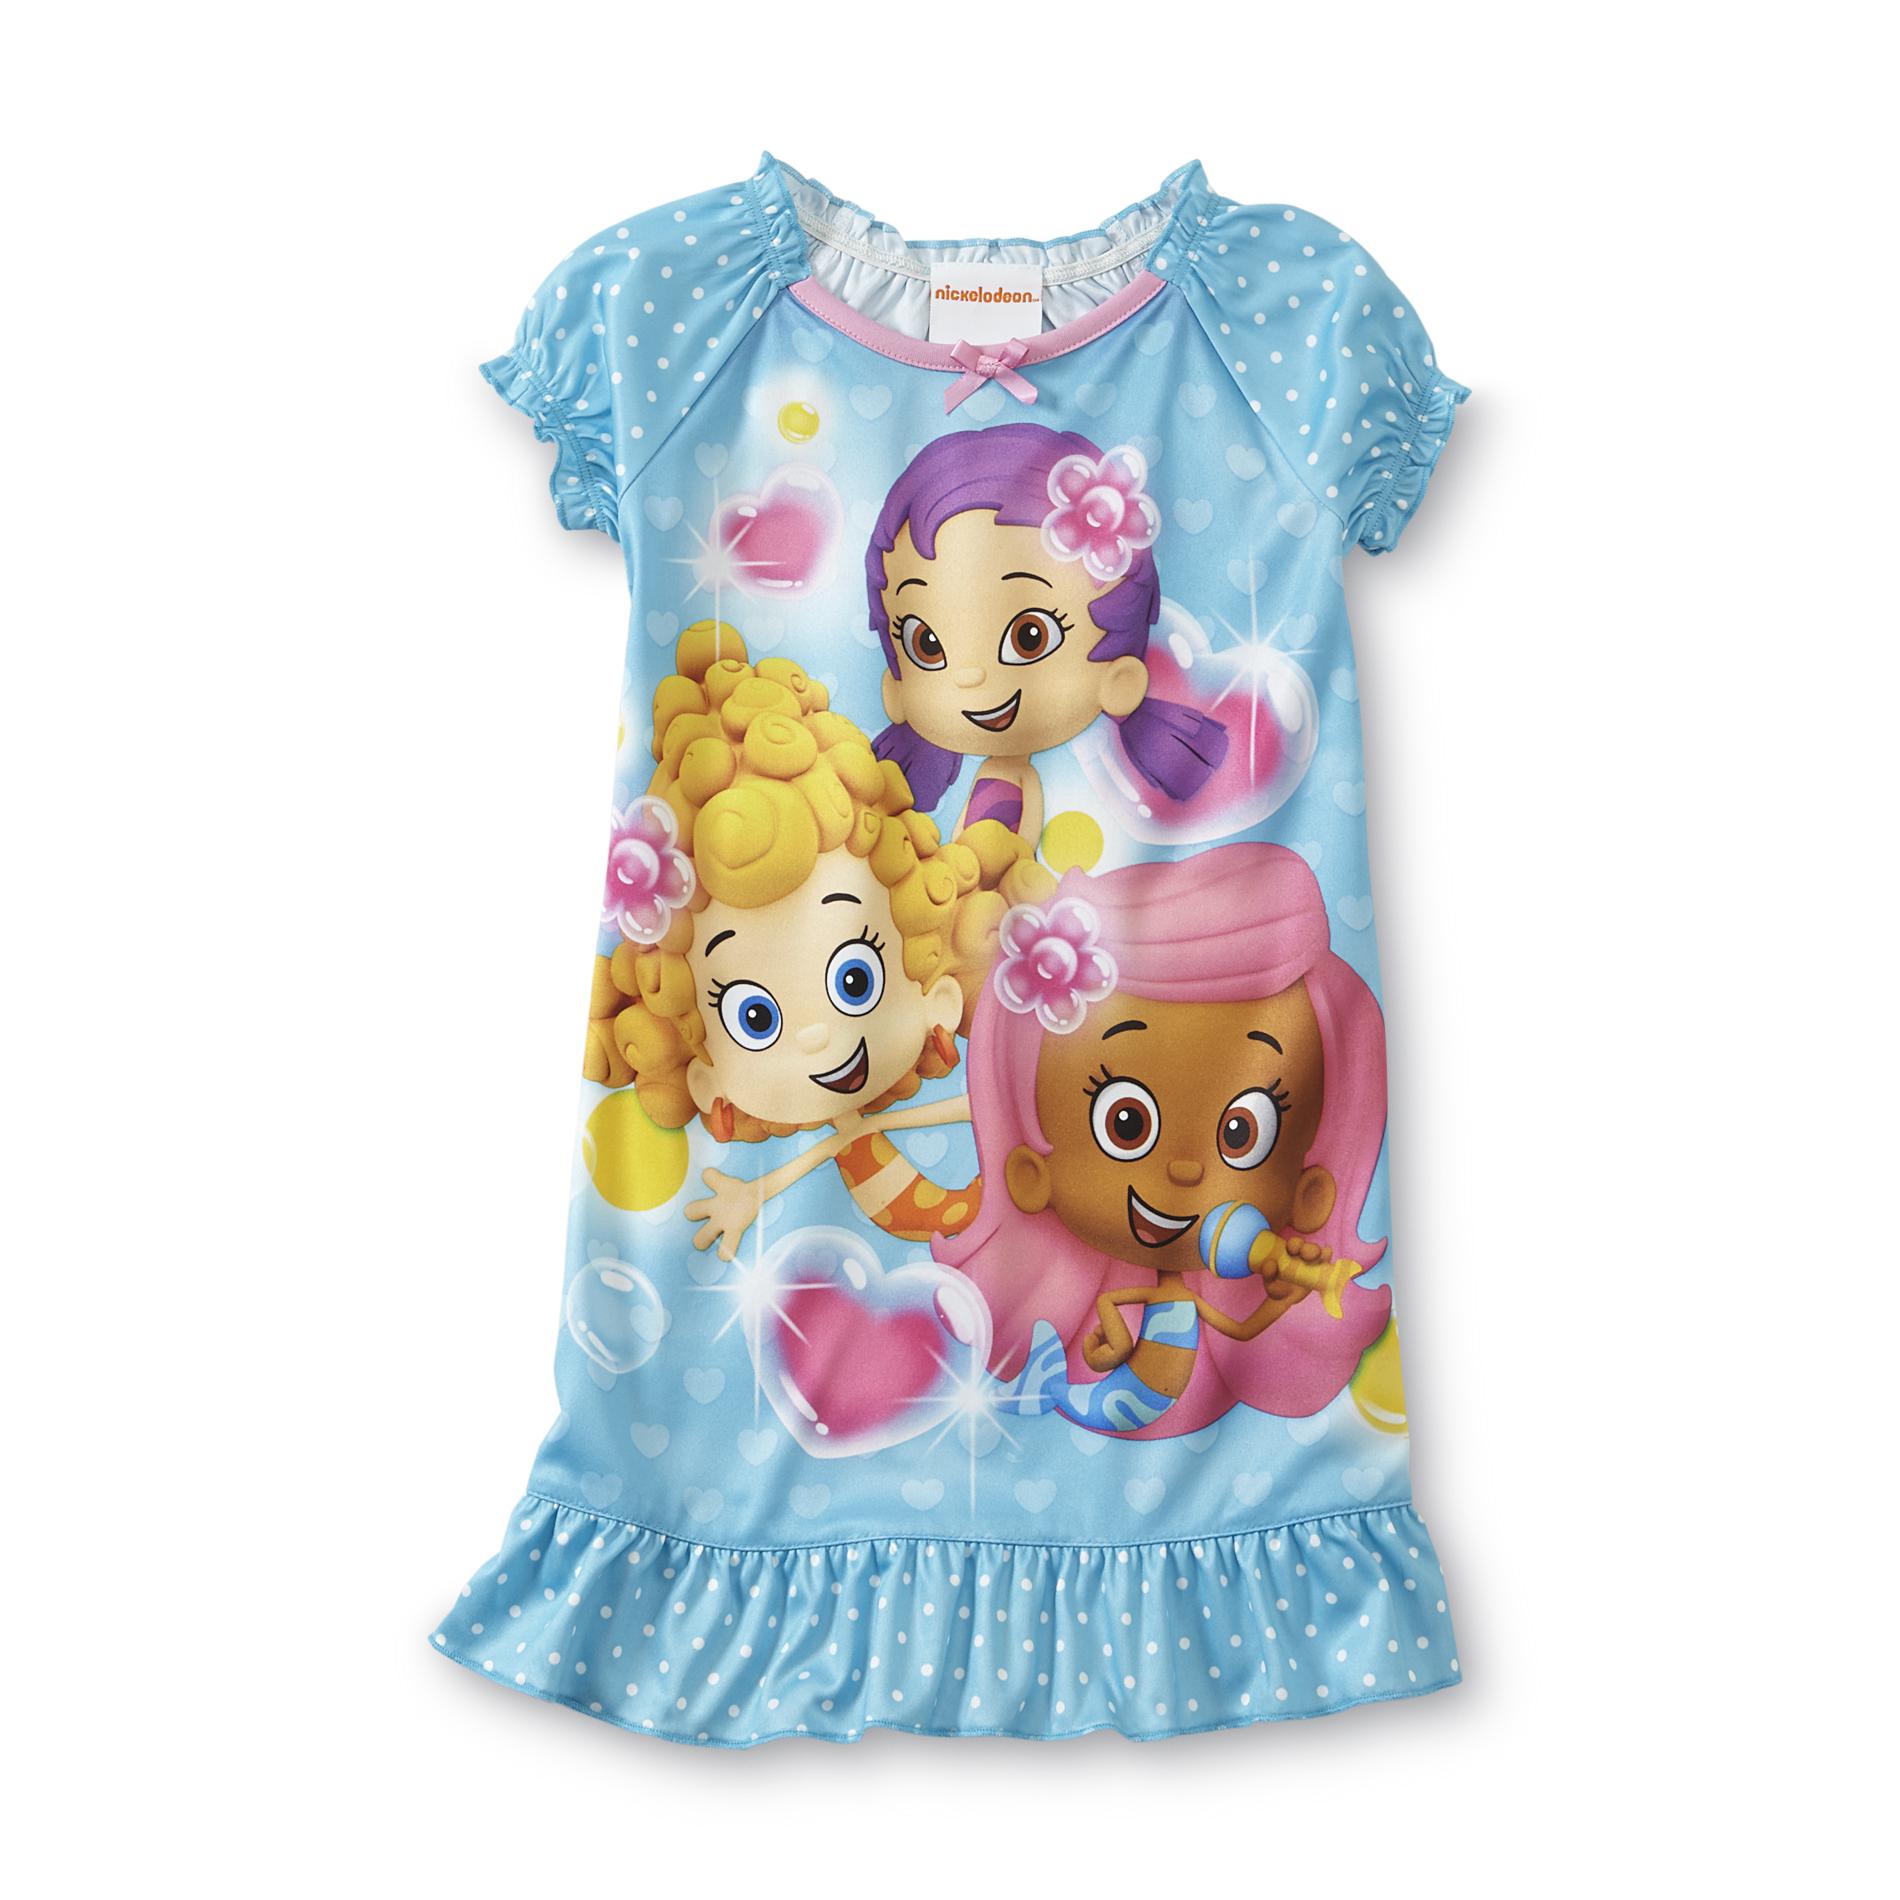 Nickelodeon Bubble Guppies Infant & Toddler Girl's Nightgown - Molly  Deema  Oona